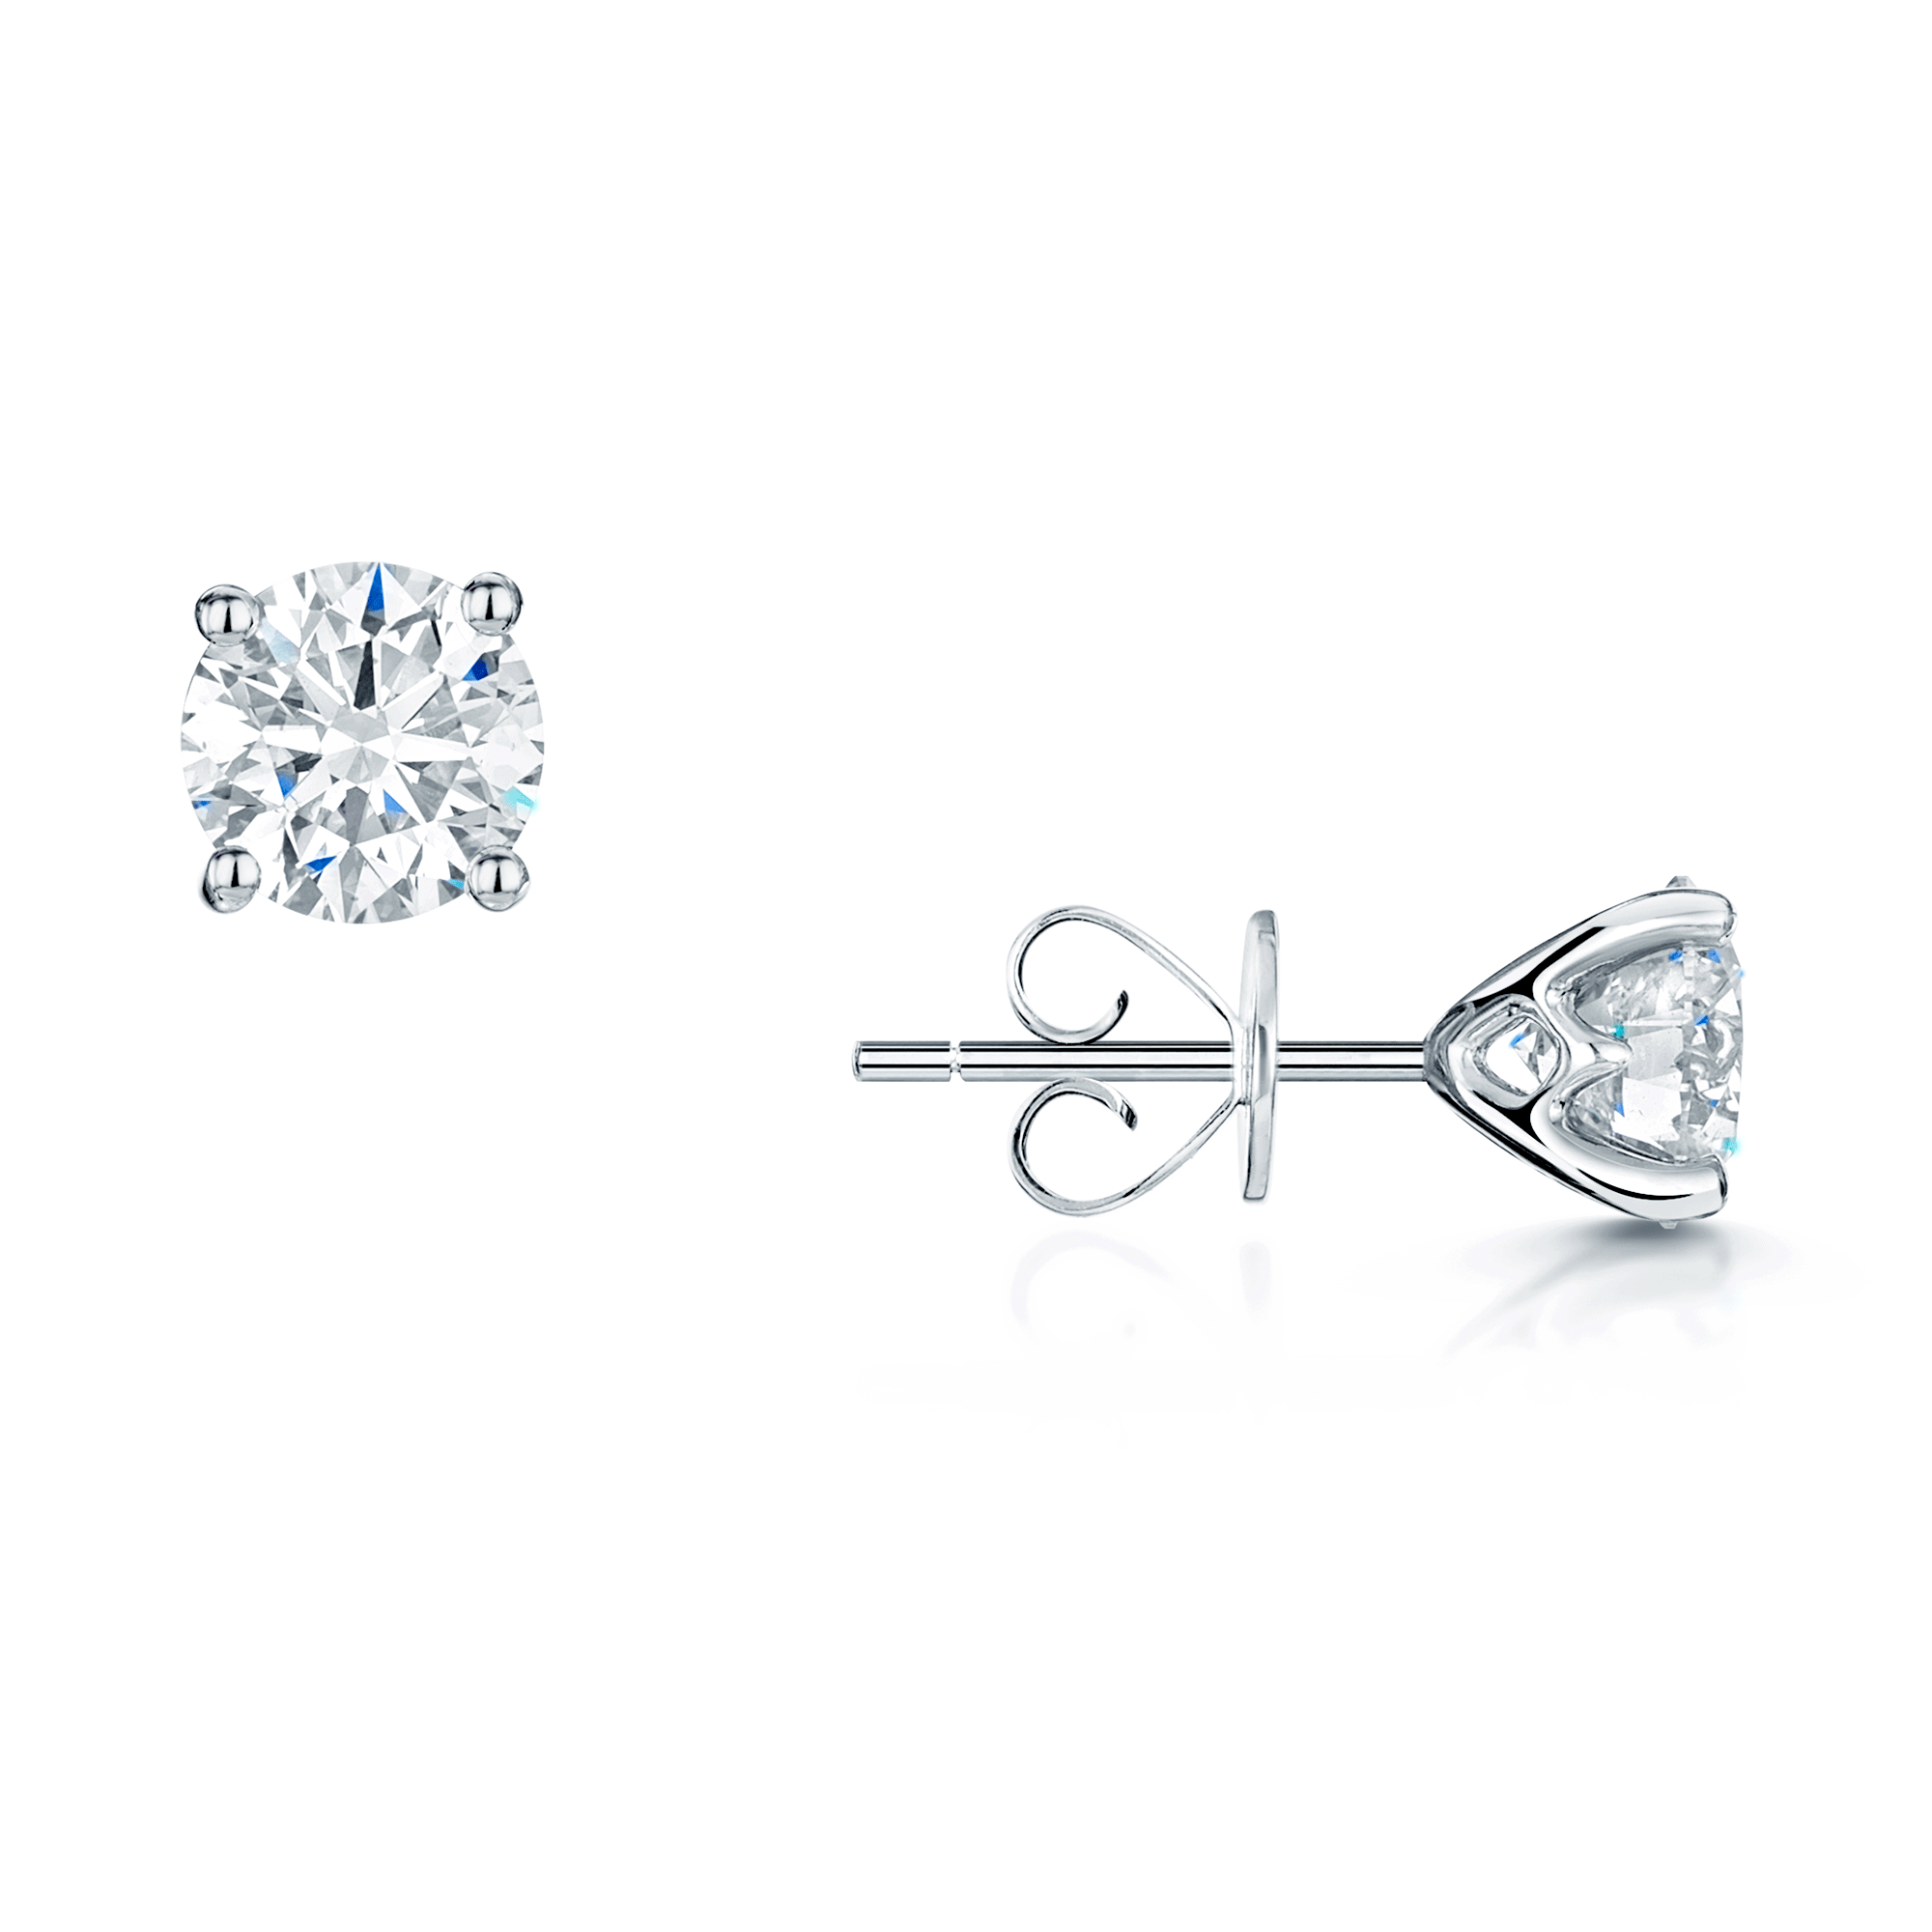 18ct White Gold GIA Certificated Round Brilliant Cut Diamond Single Stone Stud Earrings